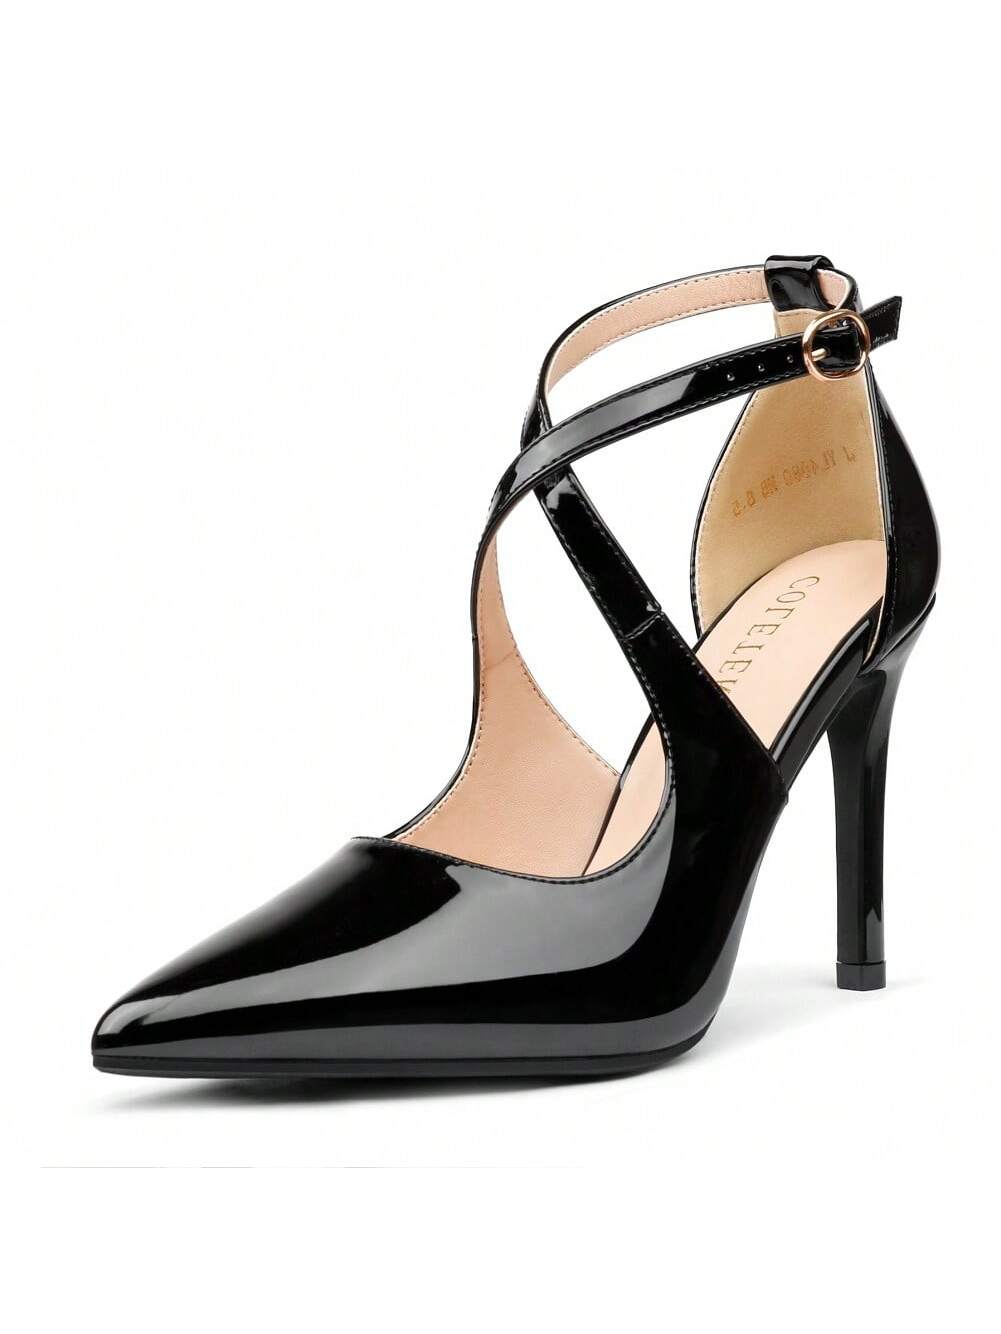 Sophisticated Cross-Strap D'Orsay Pointed Toe Stiletto Heels